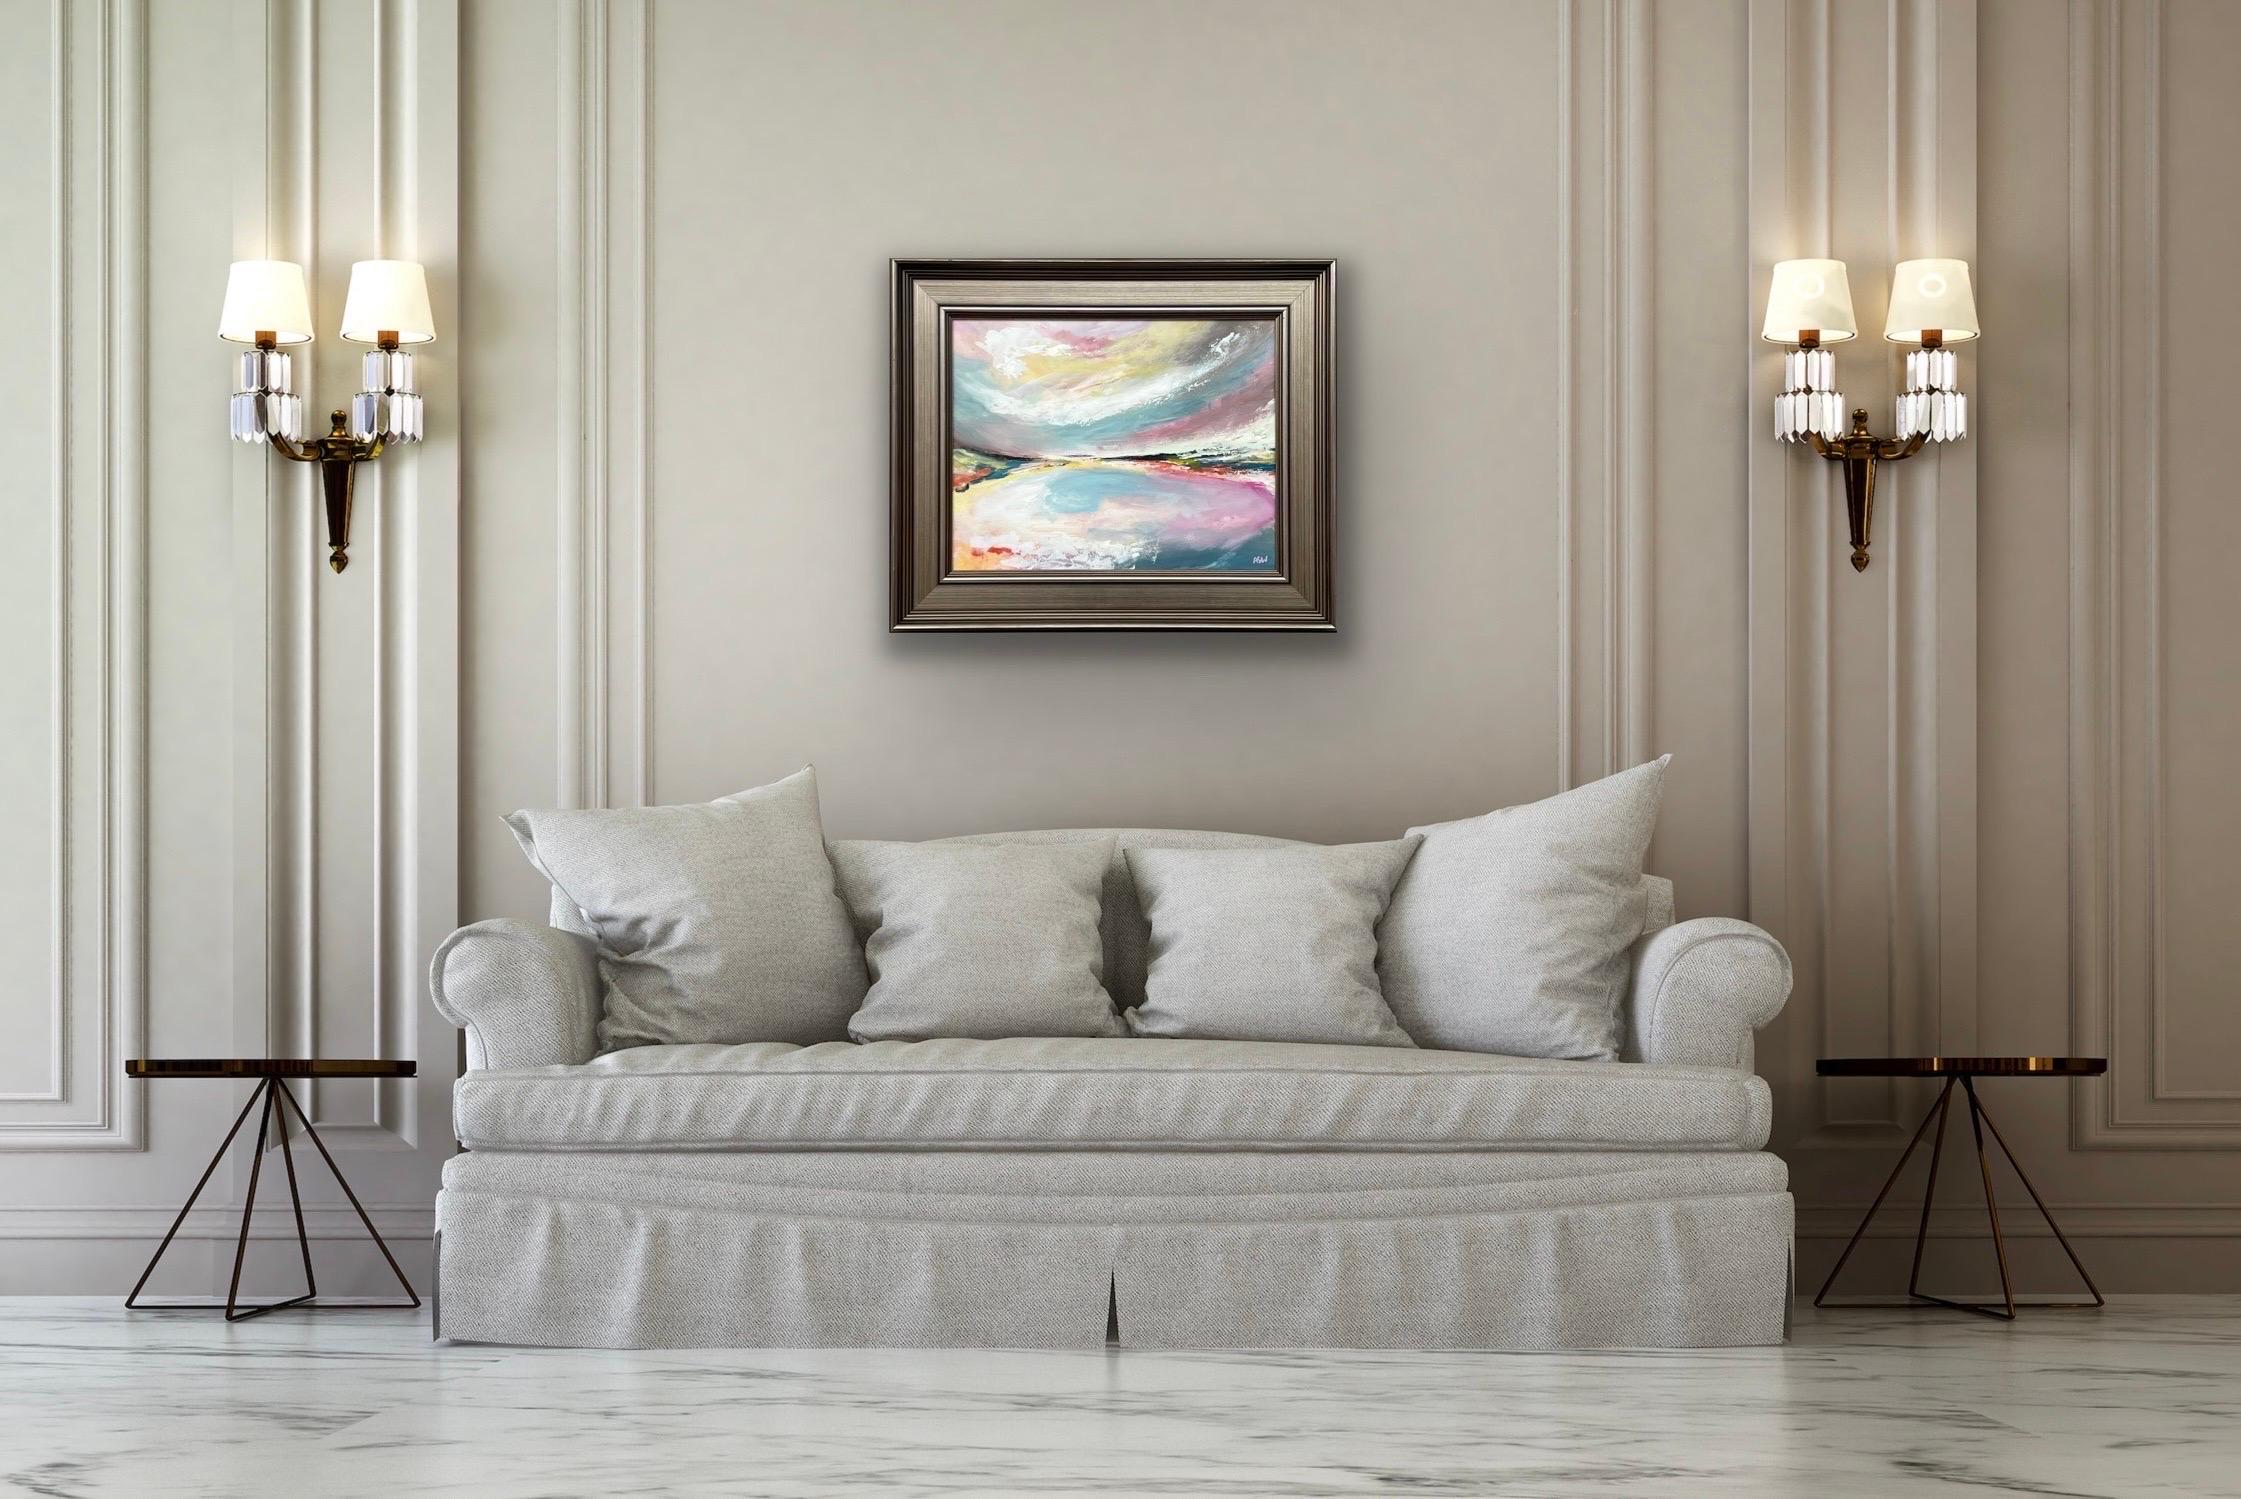 Abstract Landscape Seascape Art with Pink Blue & White Sky by British Painter, Angela Wakefield

Art measures 18 x 14 inches
Frame measures 24 x 20 inches

This painting is an abstract landscape featuring a vibrant and dynamic color palette. The